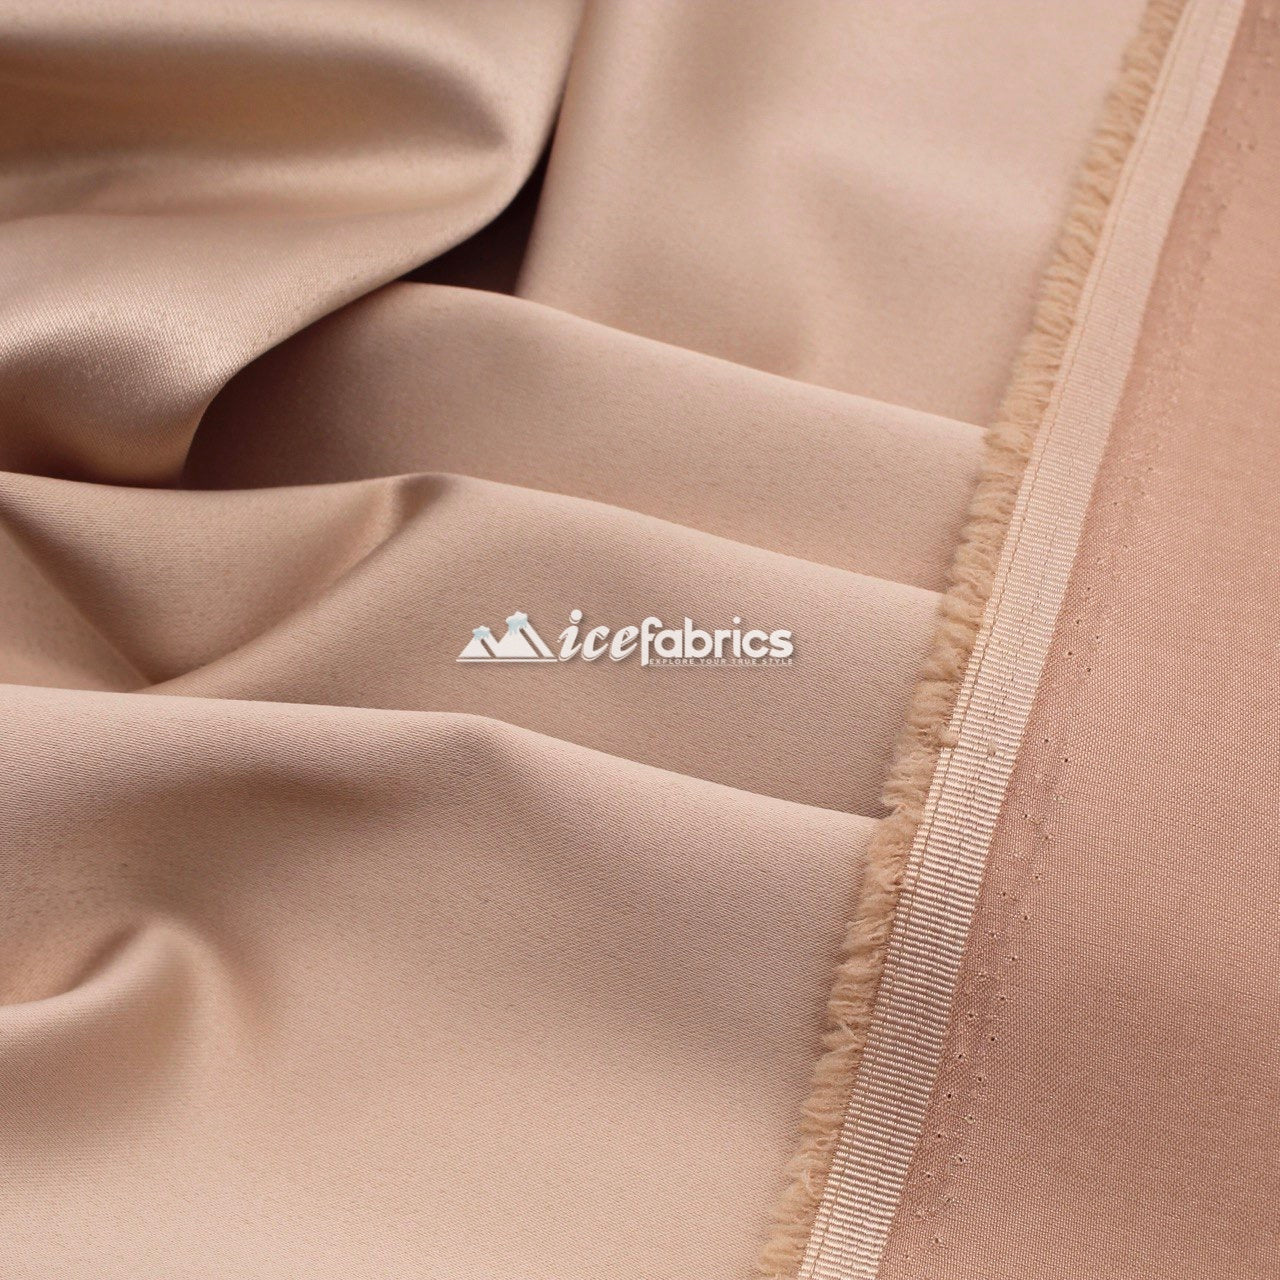 Armani Thick Solid Color Silky Stretch Satin Fabric Sold By The YardSatin FabricICE FABRICSICE FABRICSChampagneArmani Thick Solid Color Silky Stretch Satin Fabric Sold By The Yard ICE FABRICS Champagne